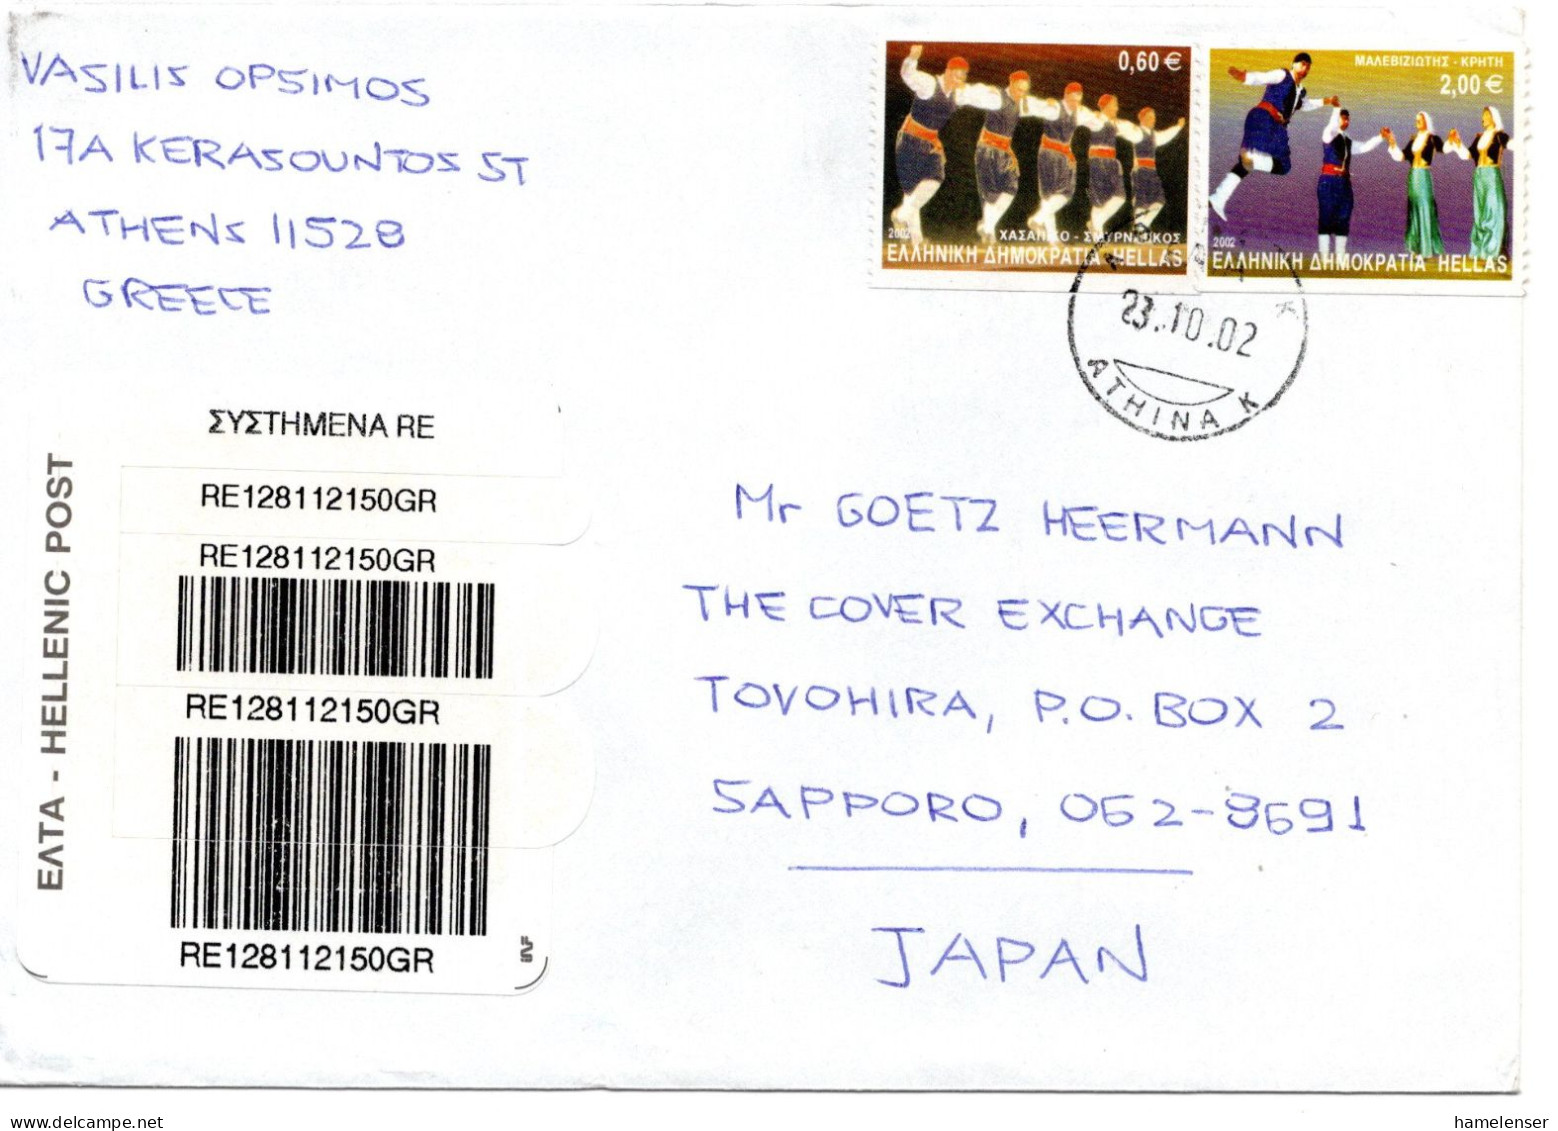 67102 - Griechenland - 2002 - €2,00 Volkstanz MiF A R-Bf ATHINA -> Japan - Covers & Documents